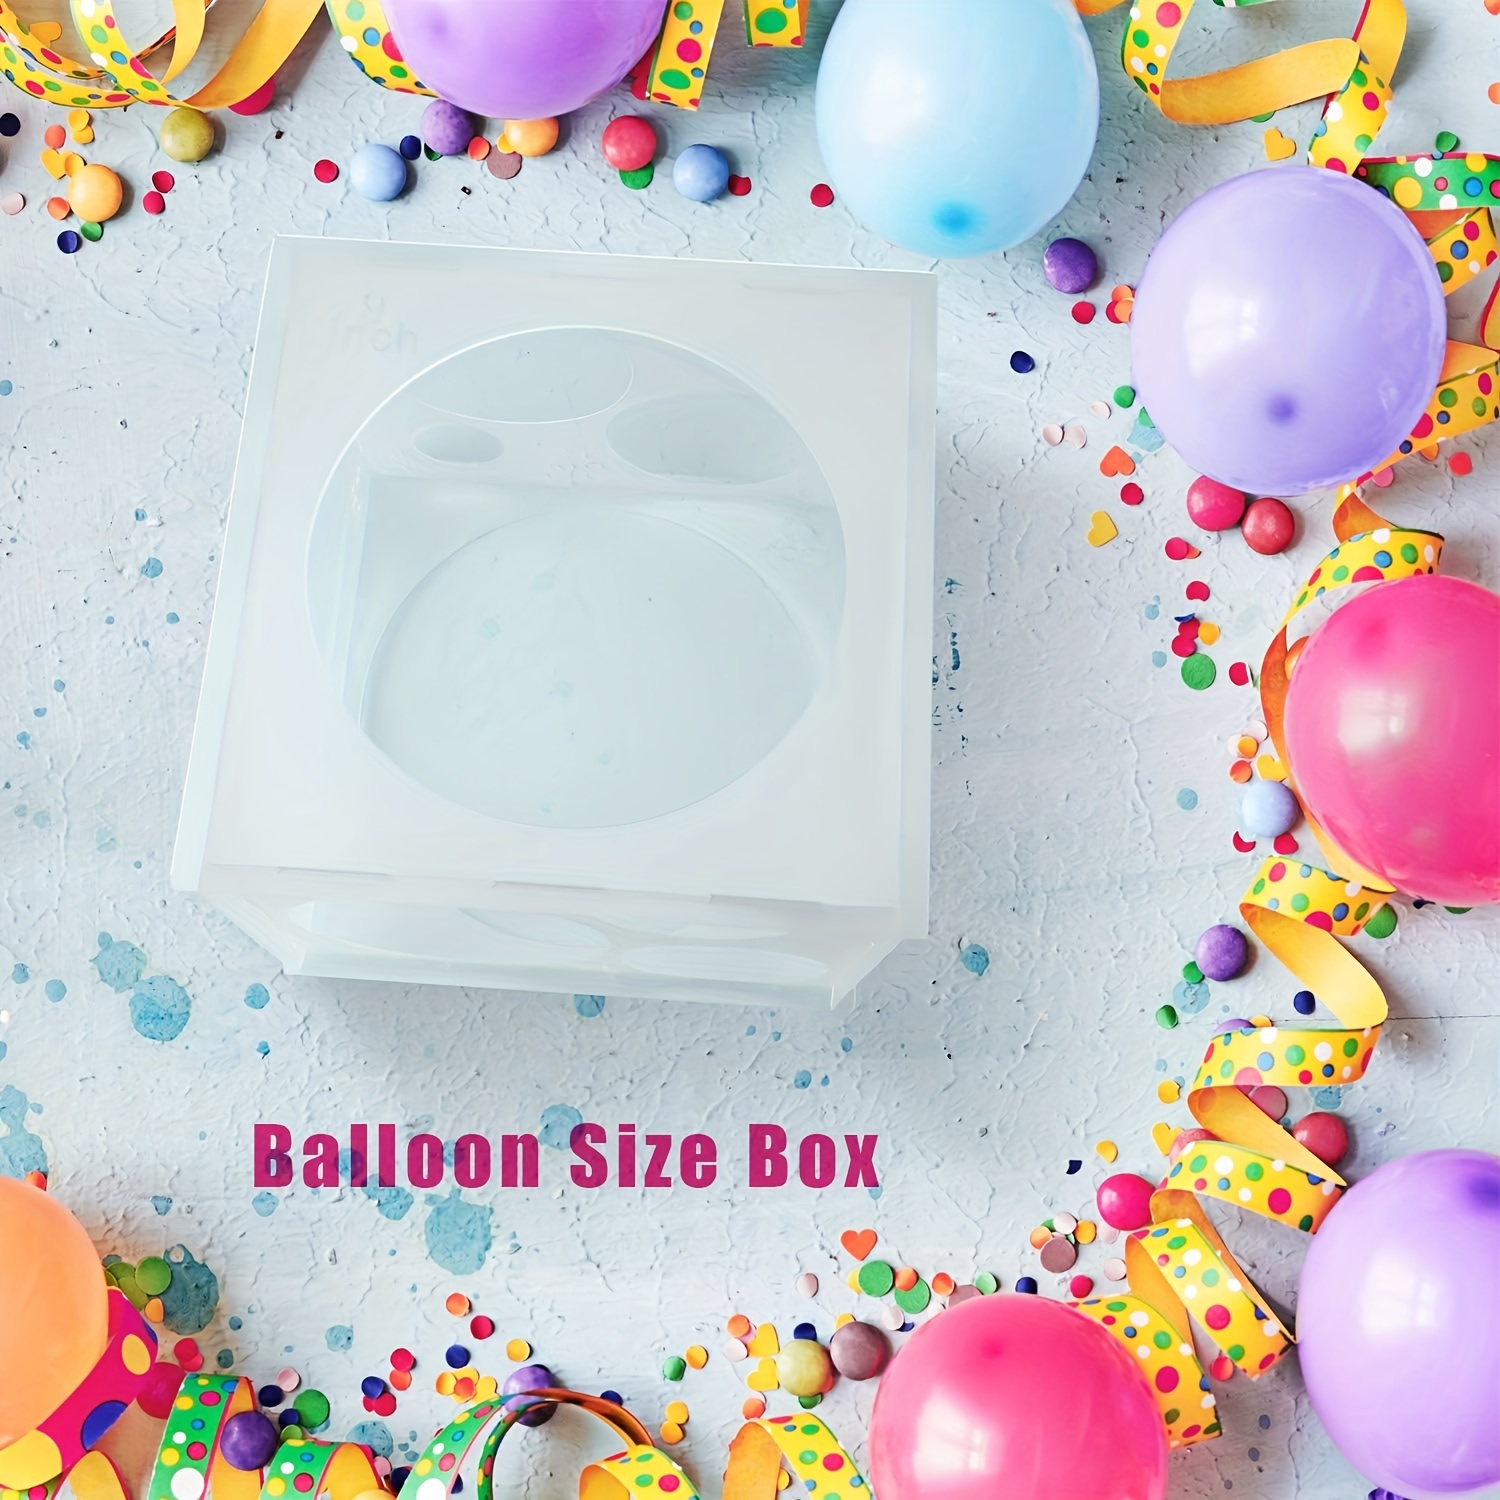  11 Hole Balloon Sizer Cube Box Measurement Tool for